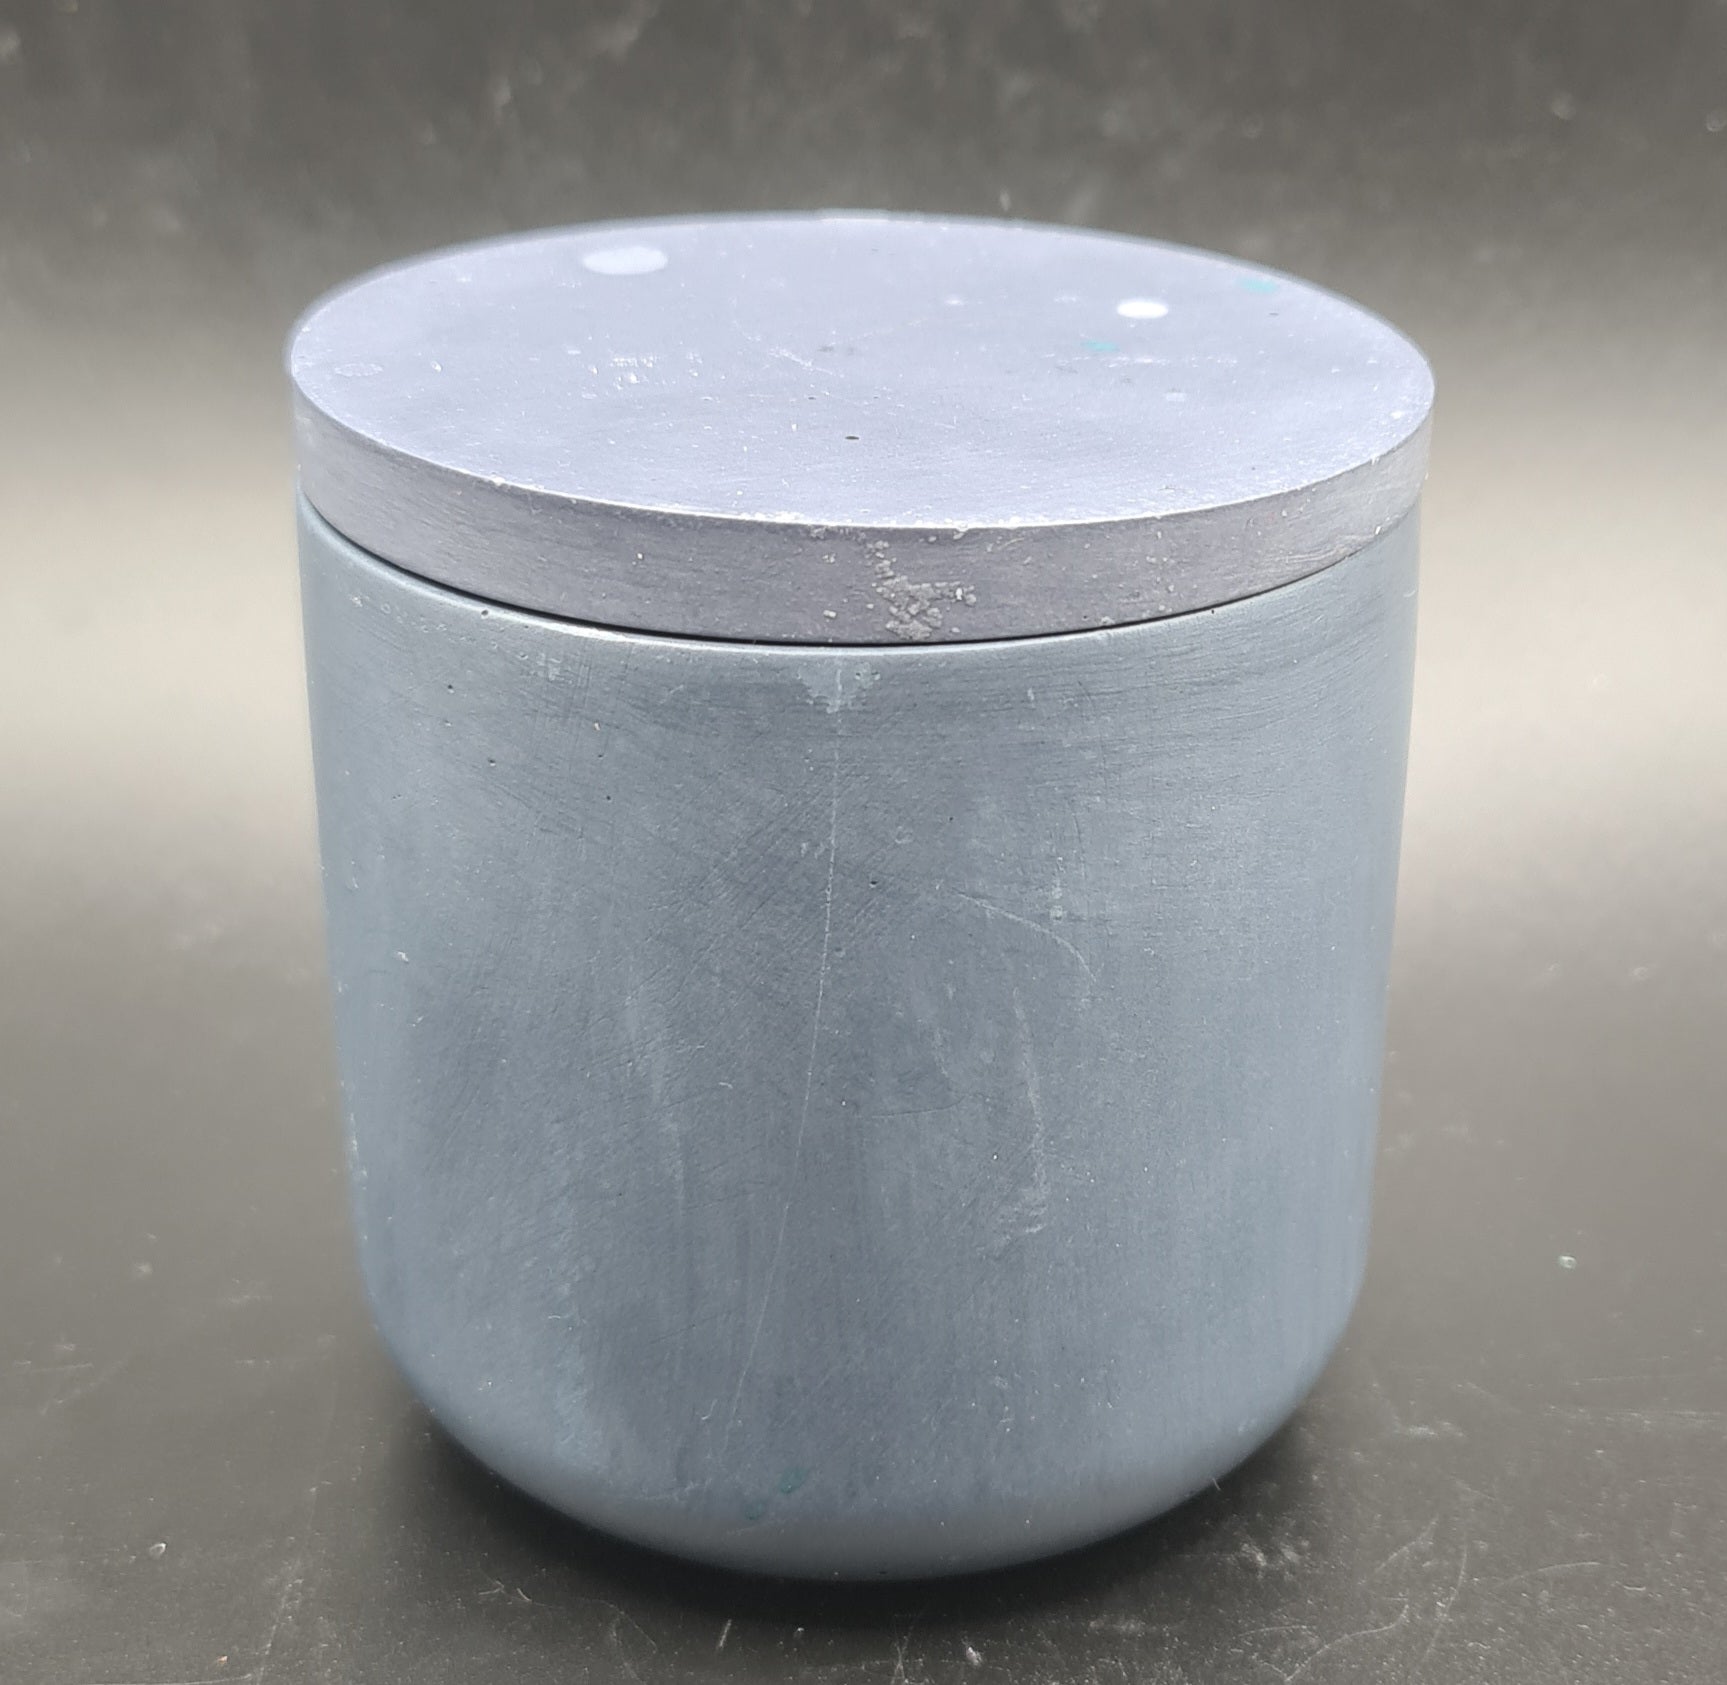 Sleek and stylish simple-pot candle, a versatile addition to your decor.